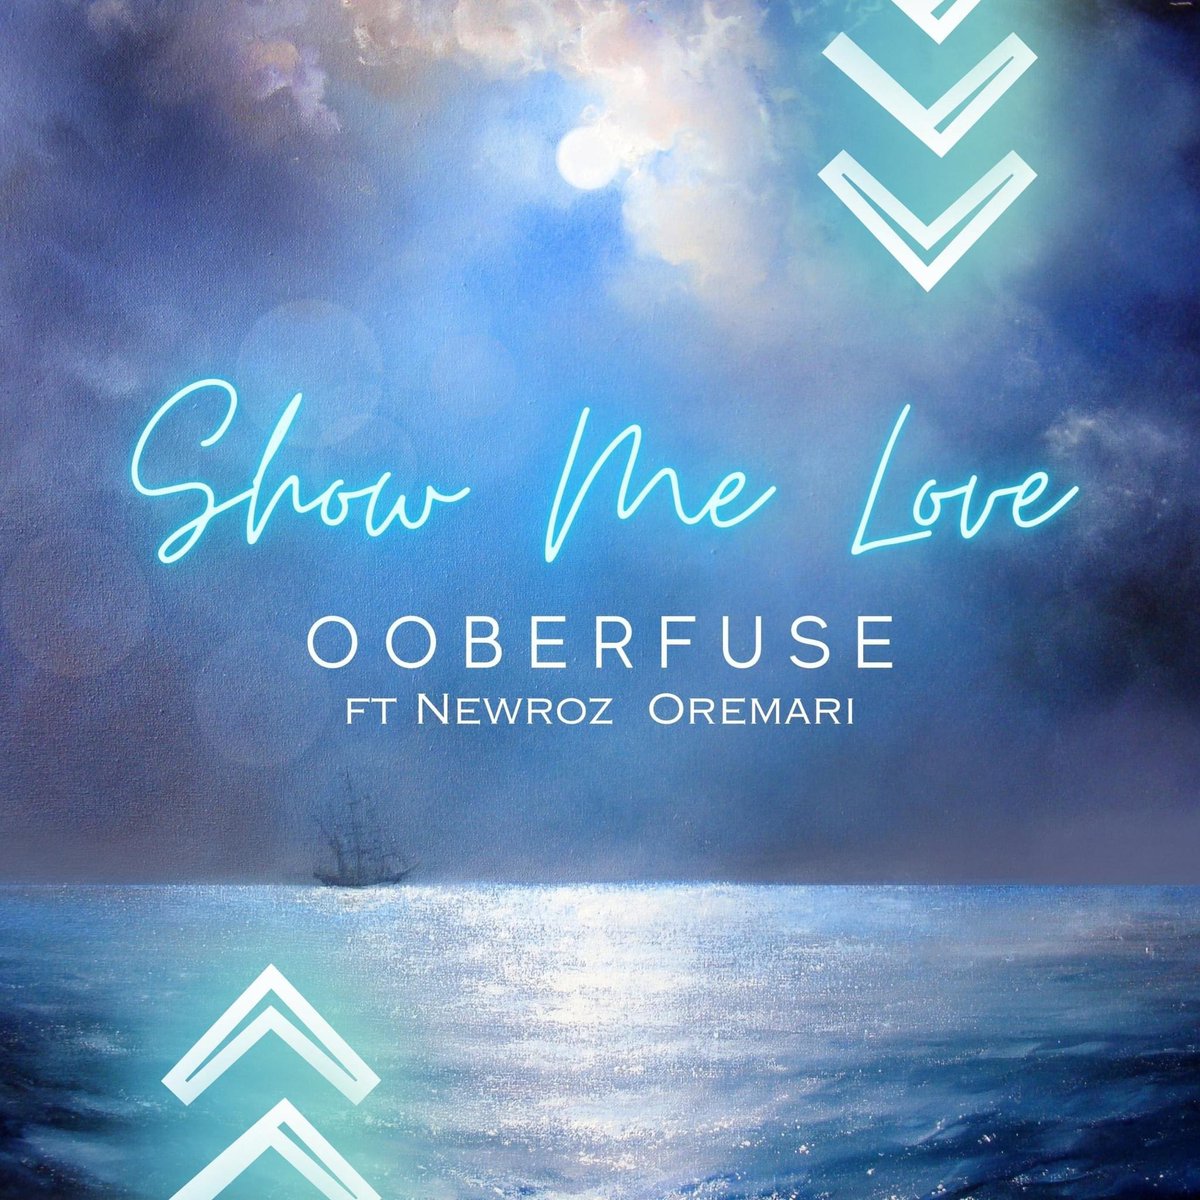 #showmelove the new single from @ooberfuse ❤️